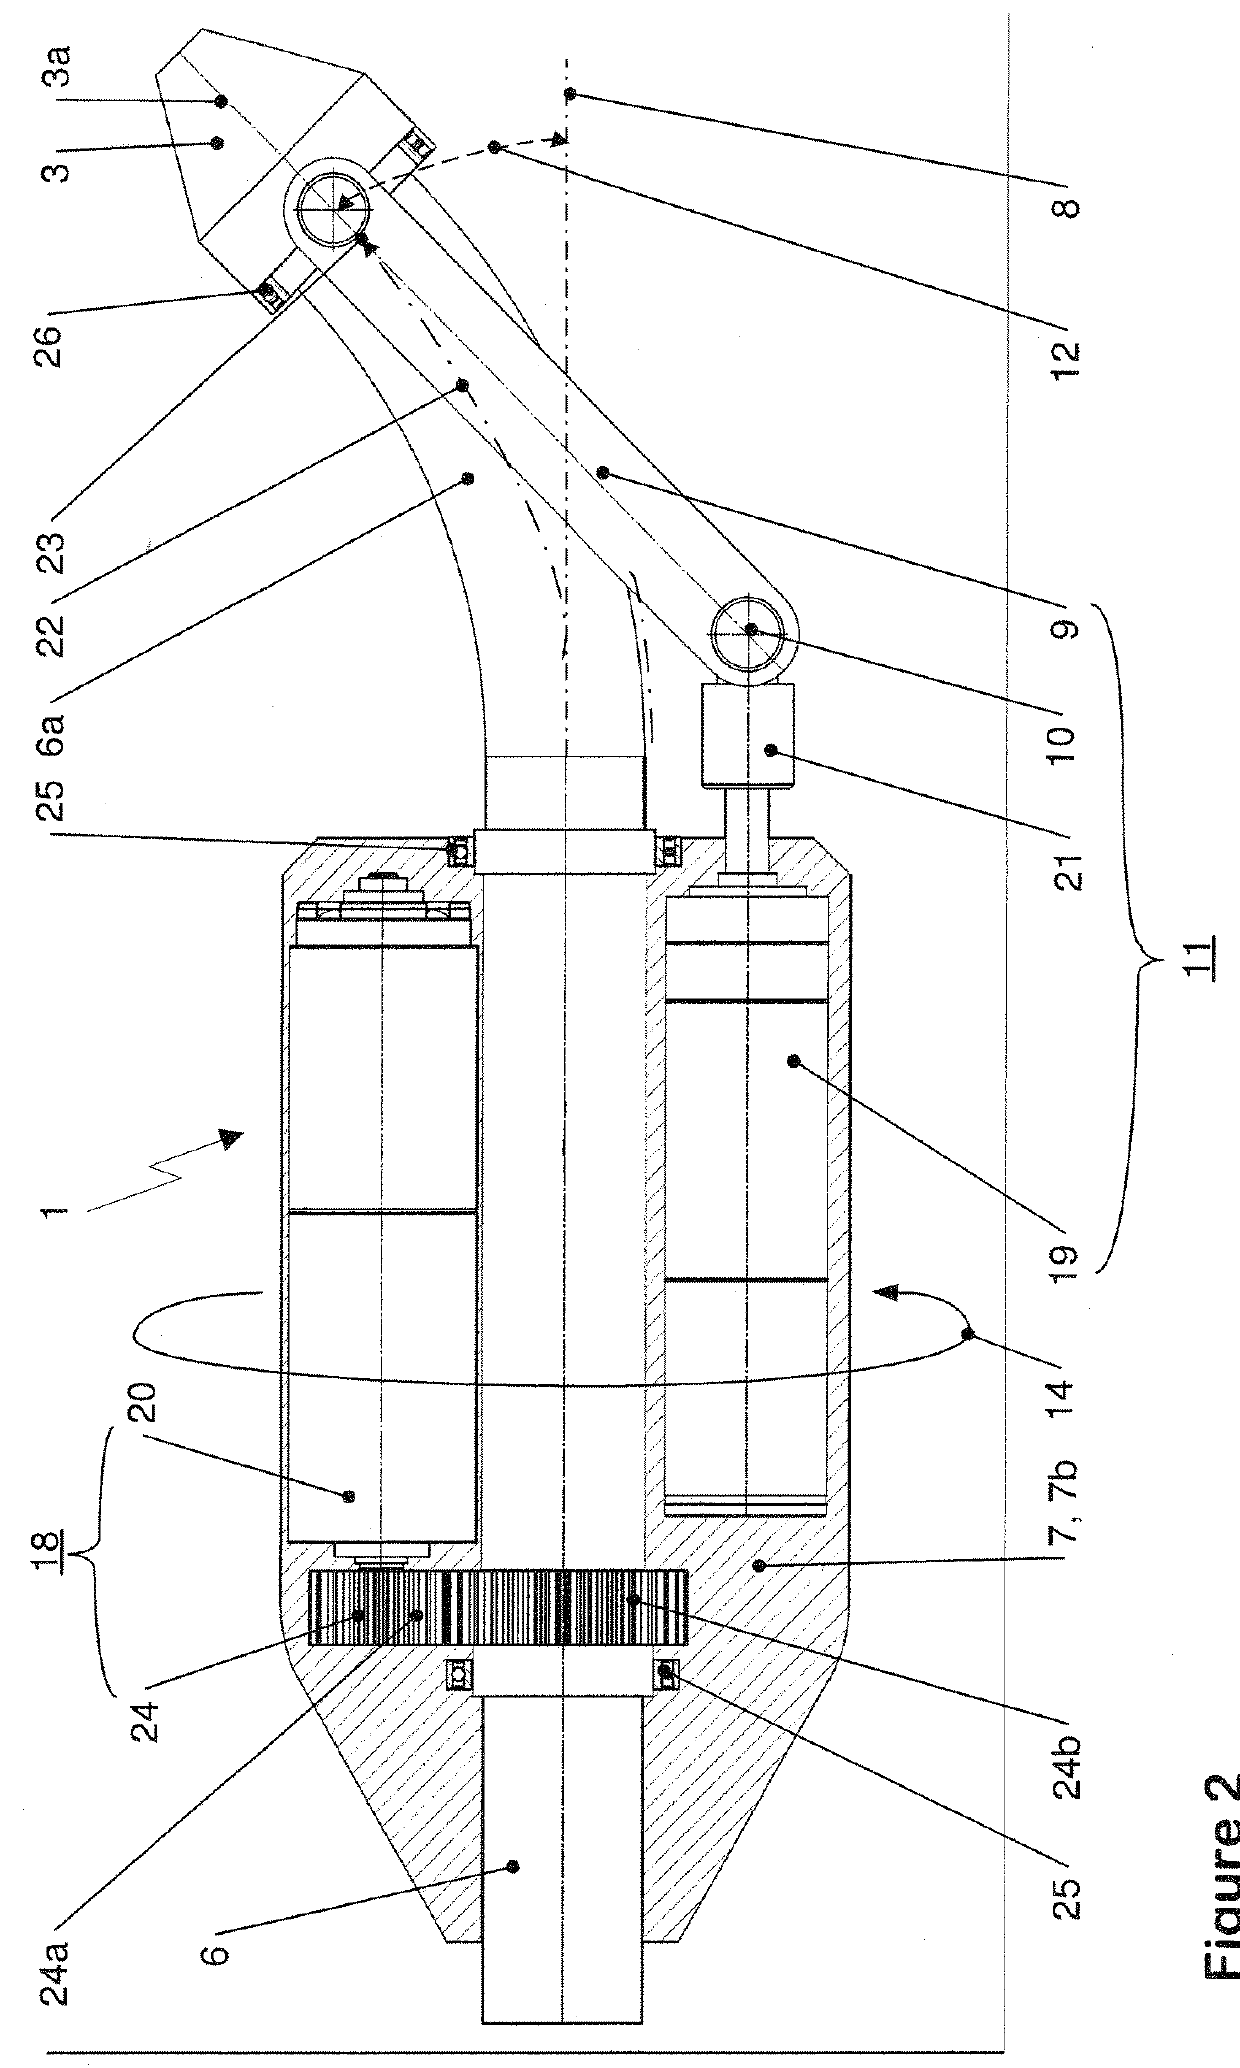 Device for cleaning pipes